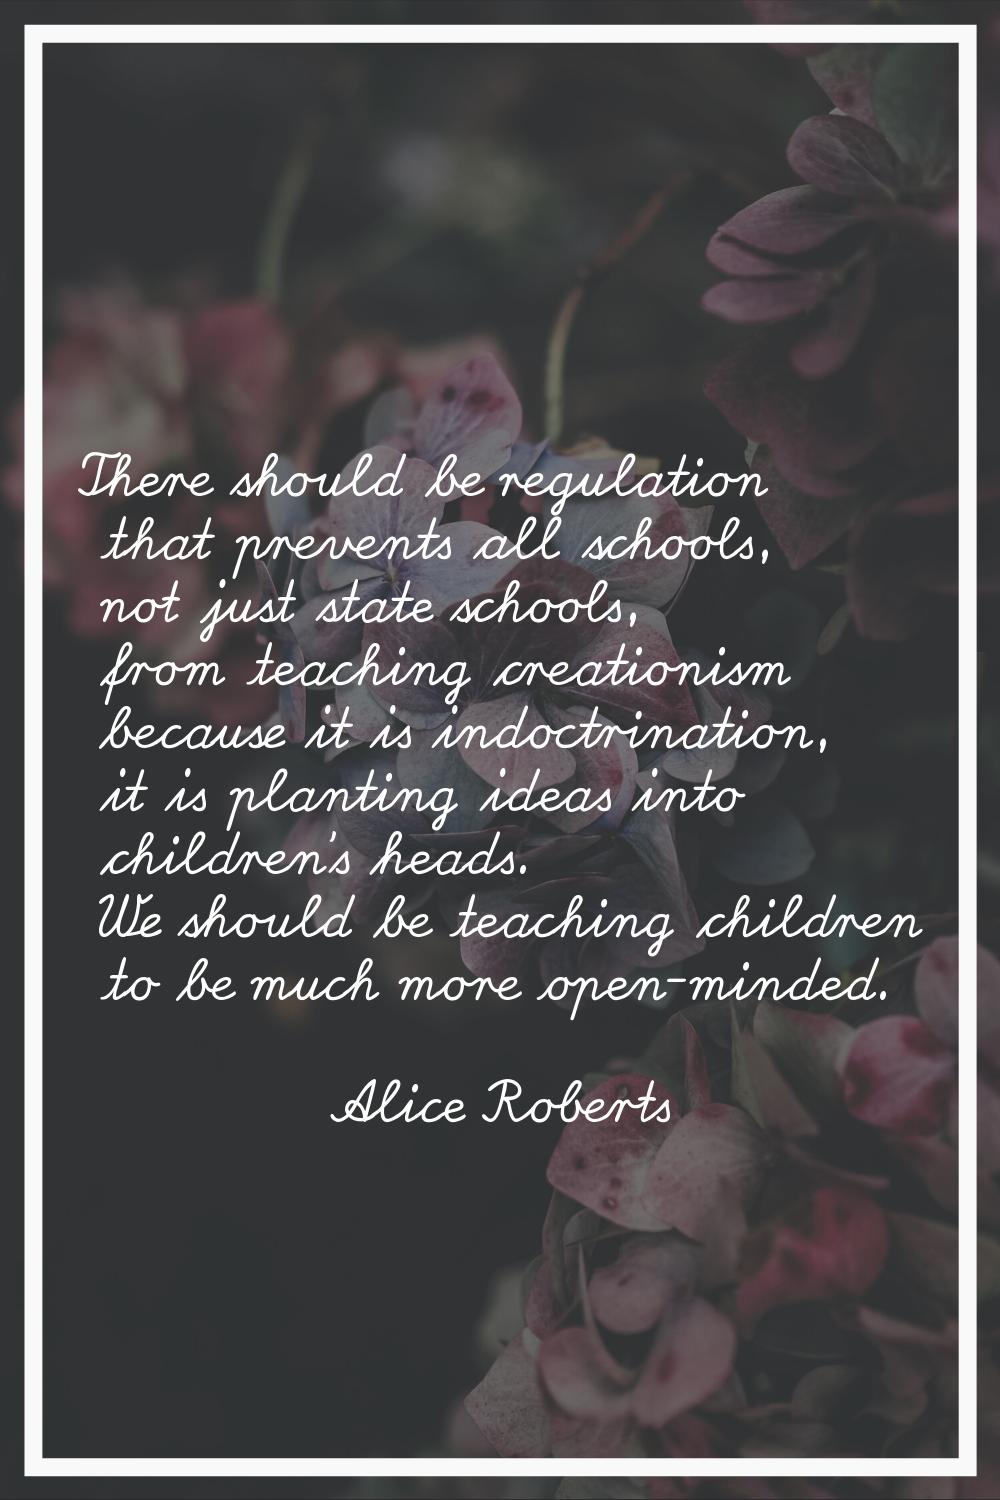 There should be regulation that prevents all schools, not just state schools, from teaching creatio